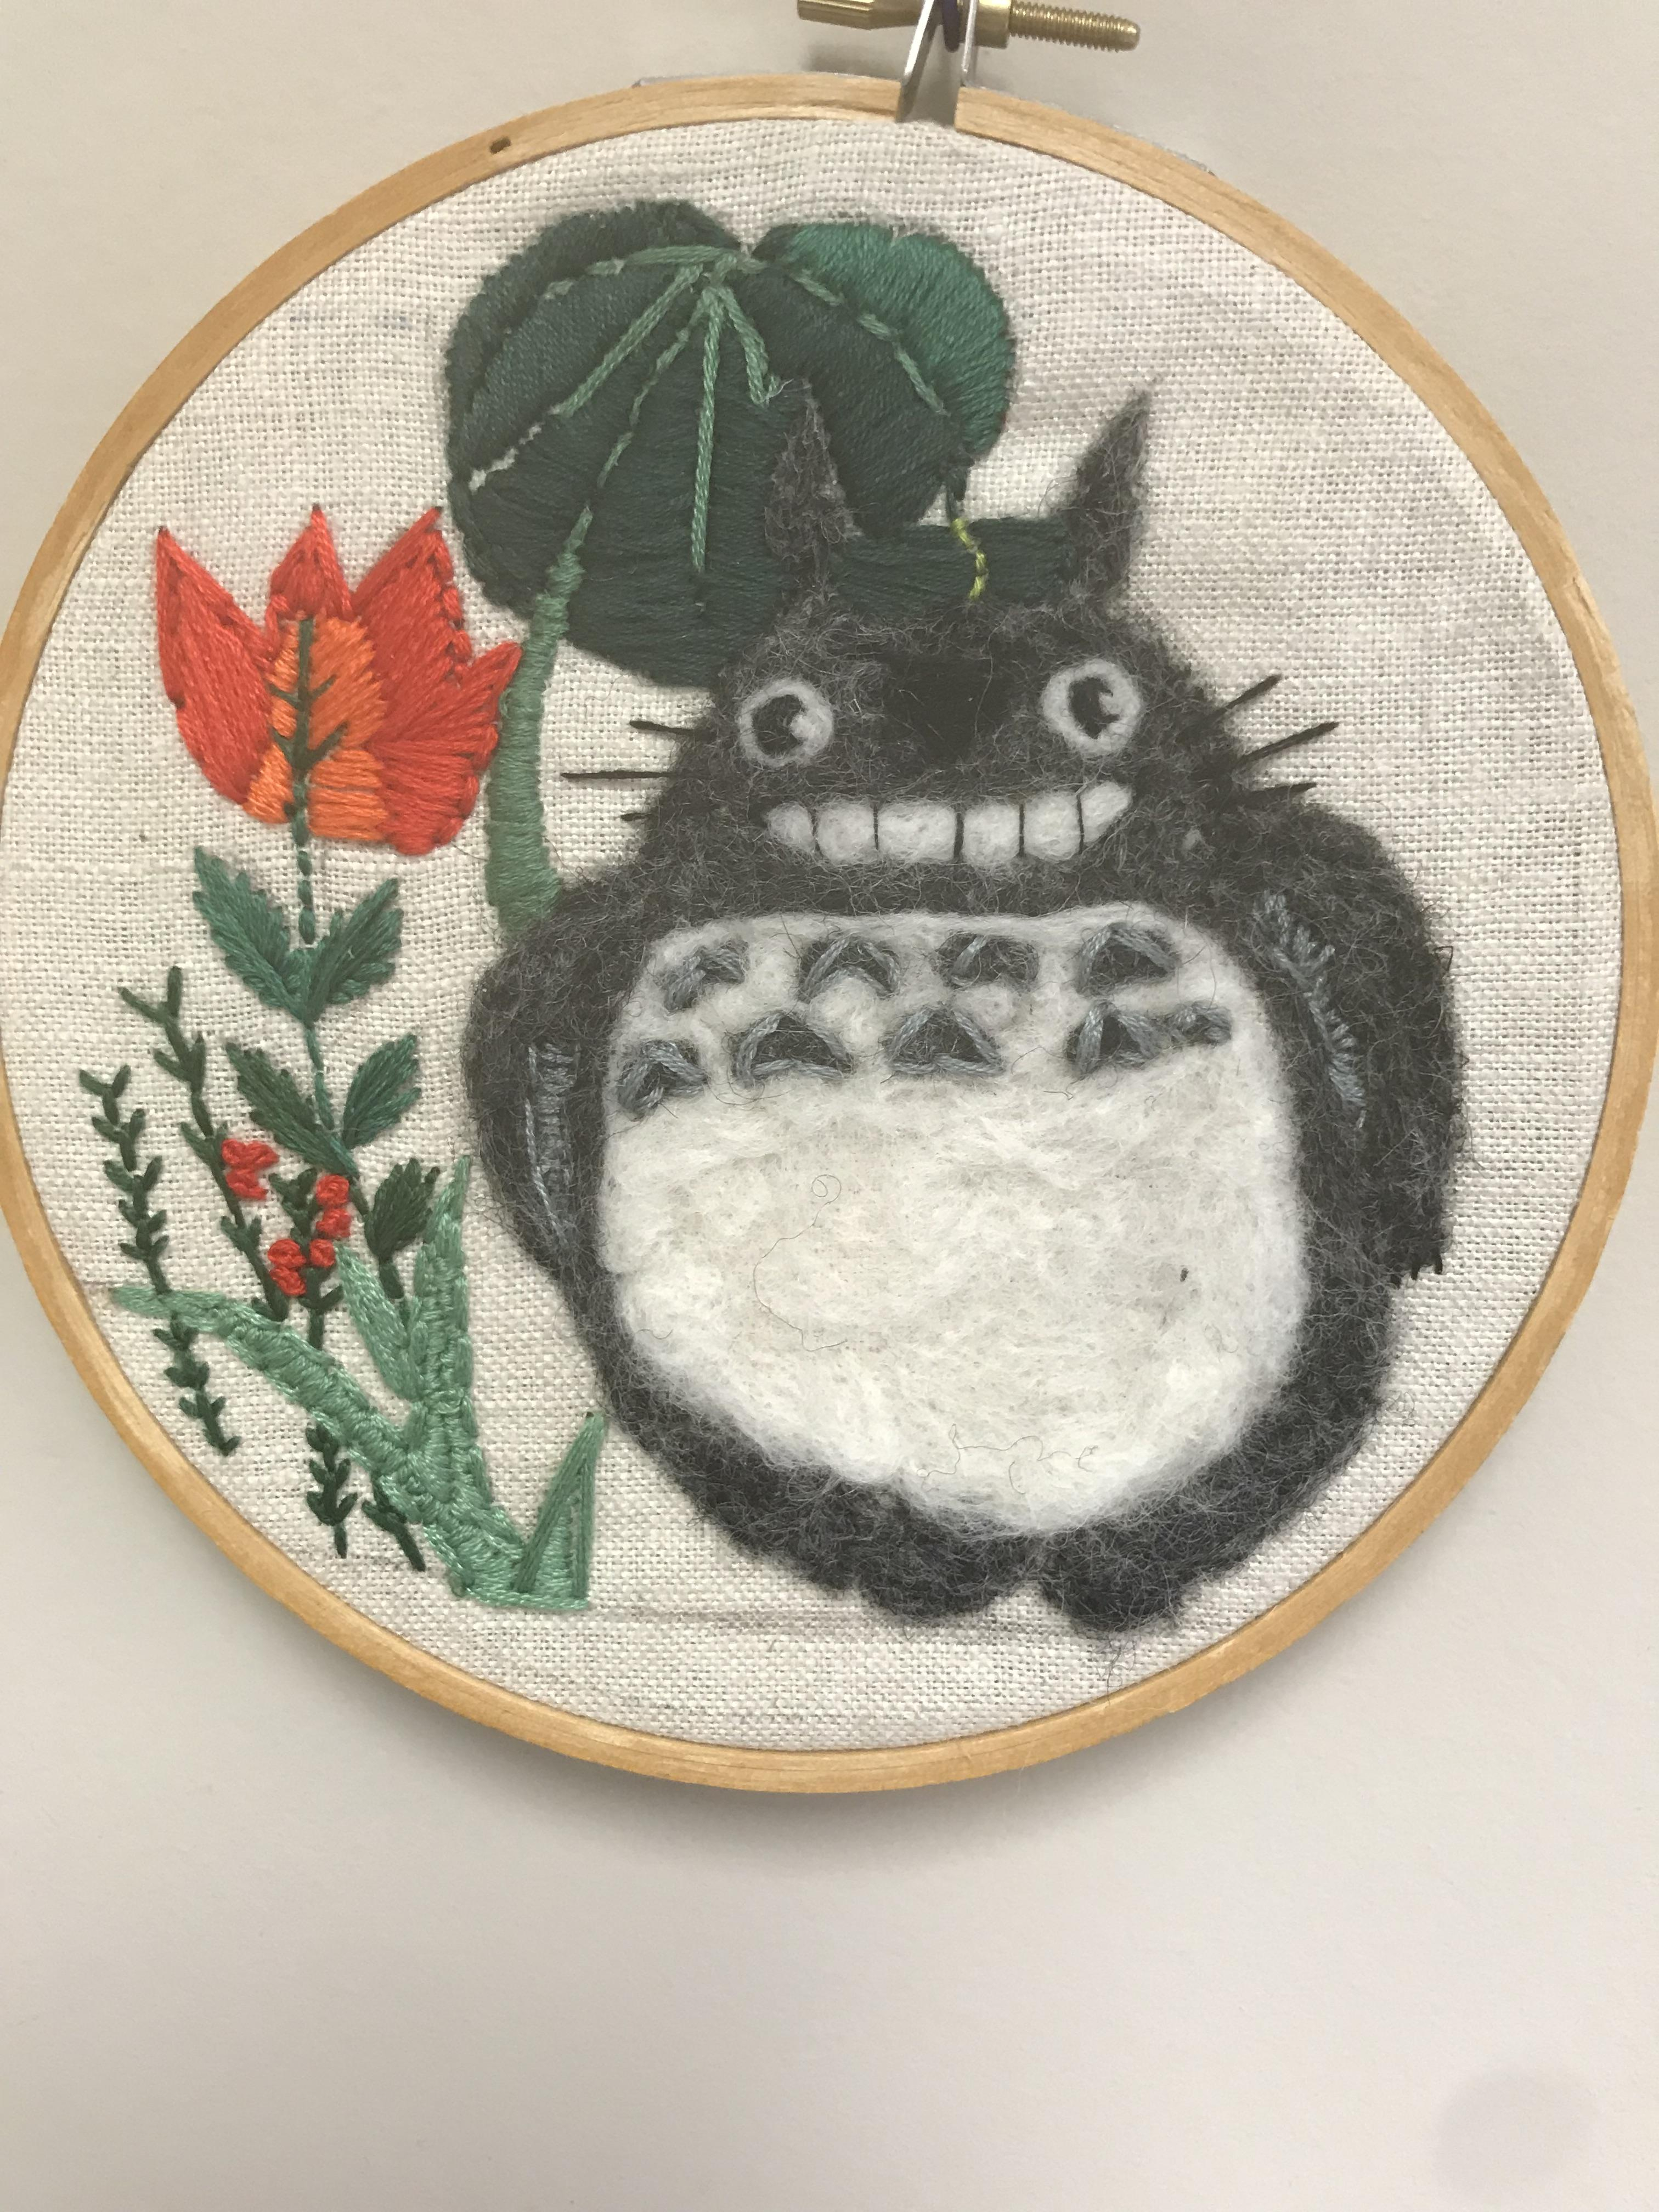 Totoro Embroidery Pattern My Neighbor Totoro Fanart Embroidery Hoop Open To Any Feedback To